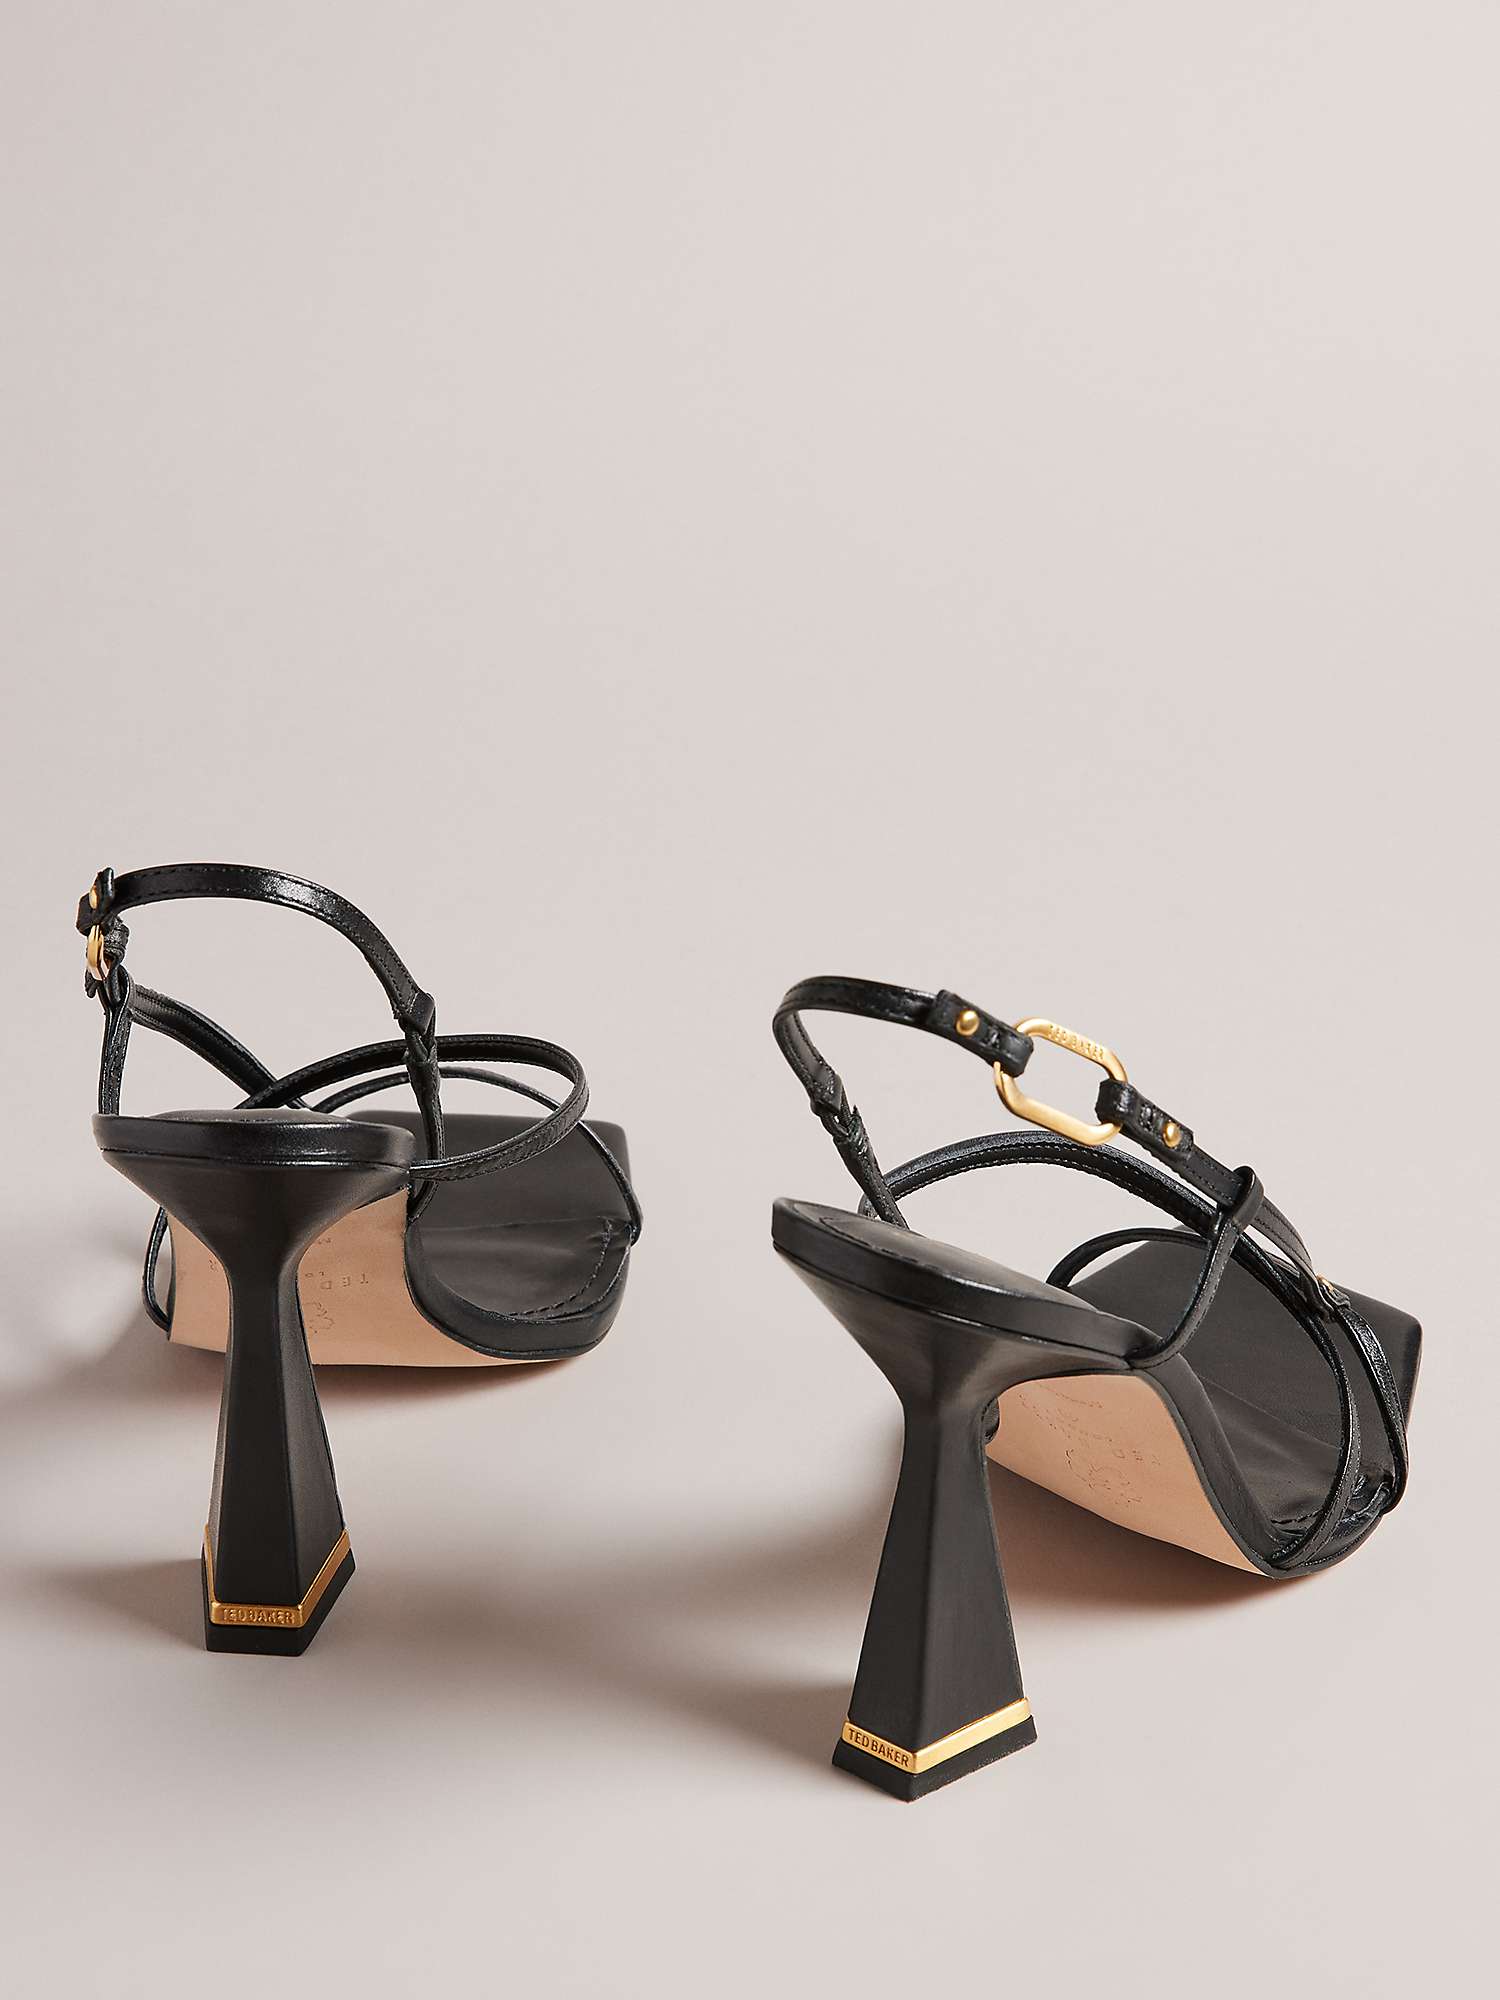 Buy Ted Baker Cayena High Heel Leather Sandals Online at johnlewis.com